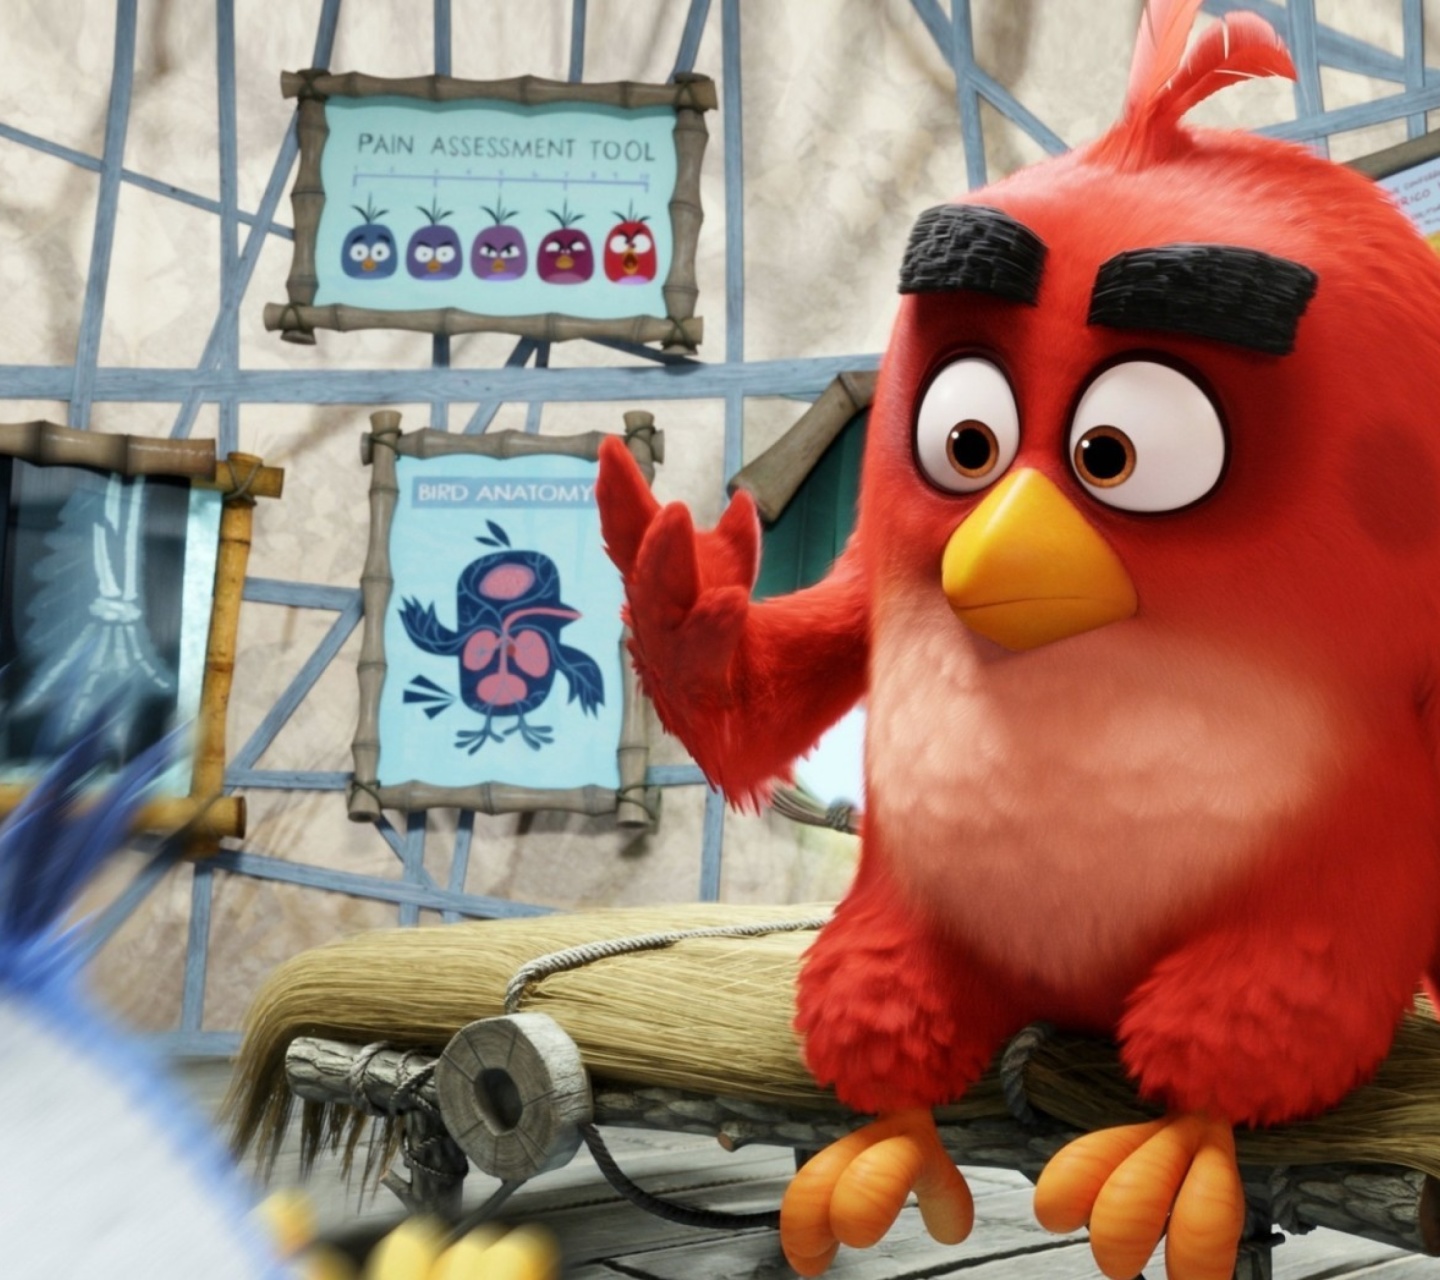 Das Angry Birds Red Wallpaper 1440x1280